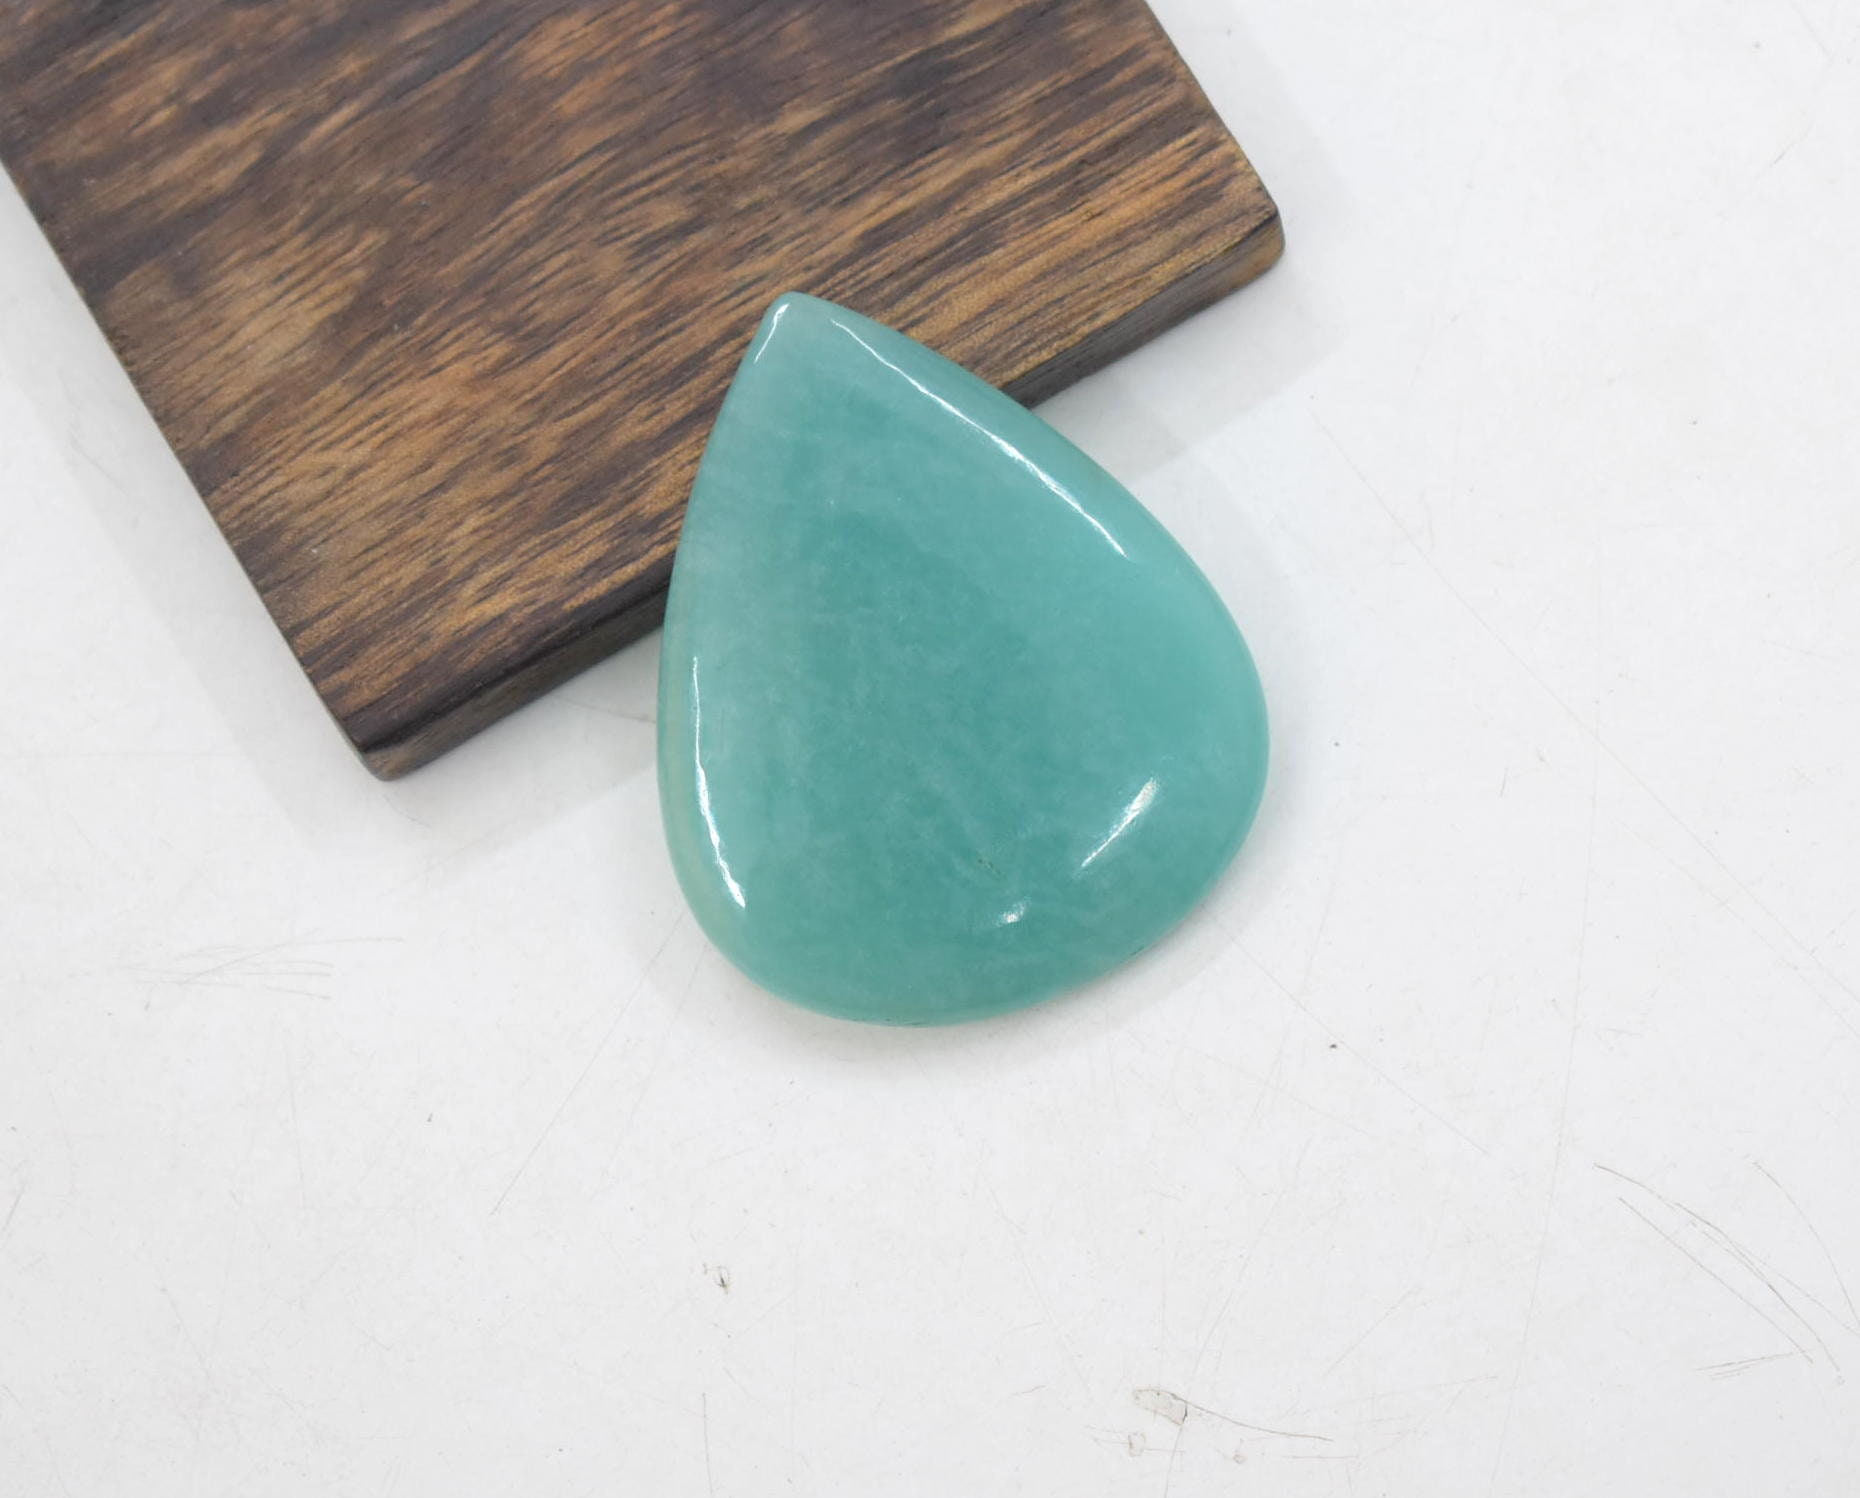 100% Natural African Amazonite Cabochon,Green Amazonite,Handmade Plain Cabochon,Handmade Faceted Cabochon,Natural Color Amazonite | Save 33% - Rajasthan Living 13